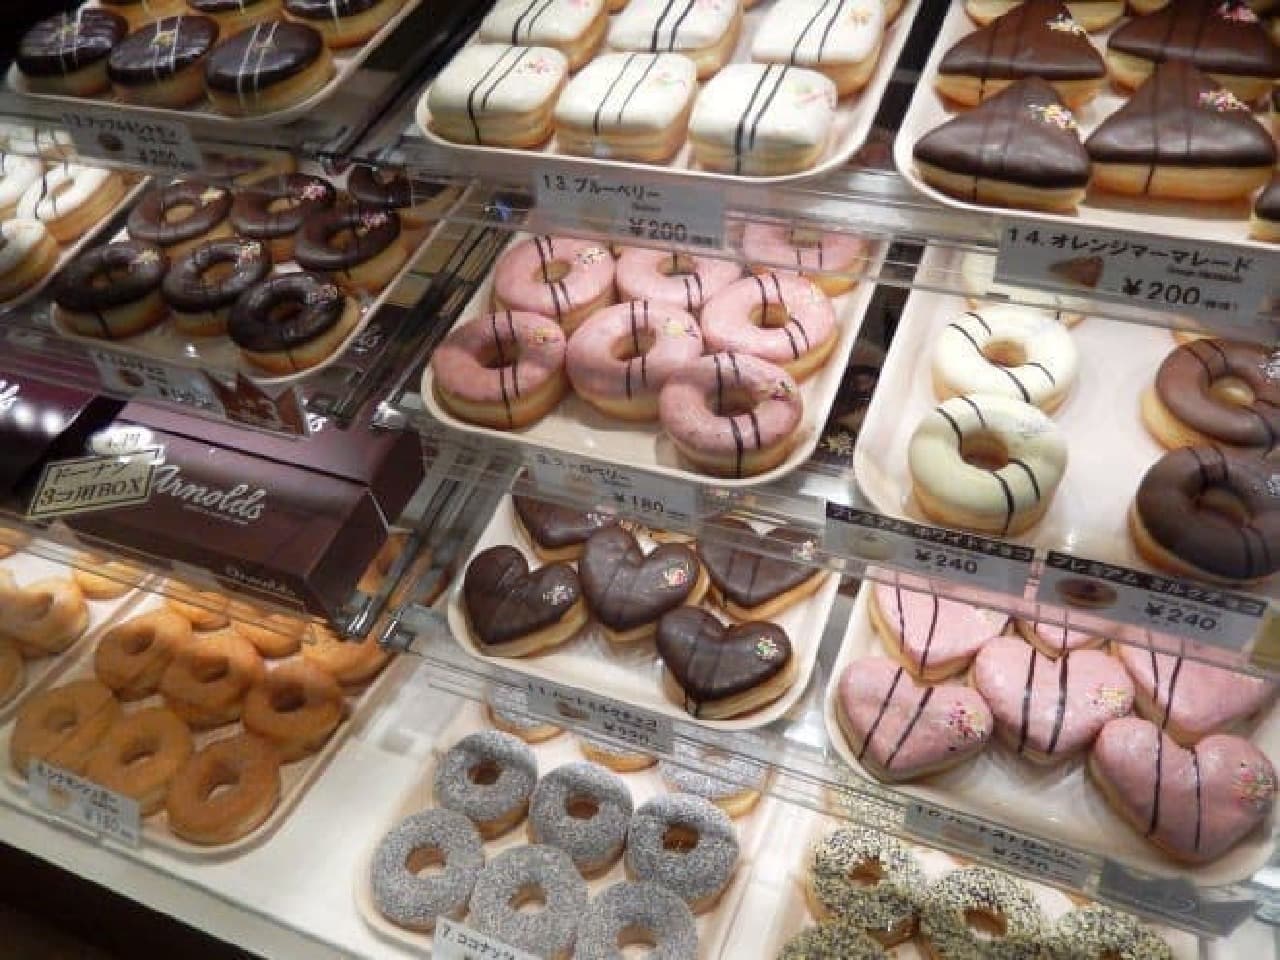 There are so many different donuts to choose from that you can do a psychological test!